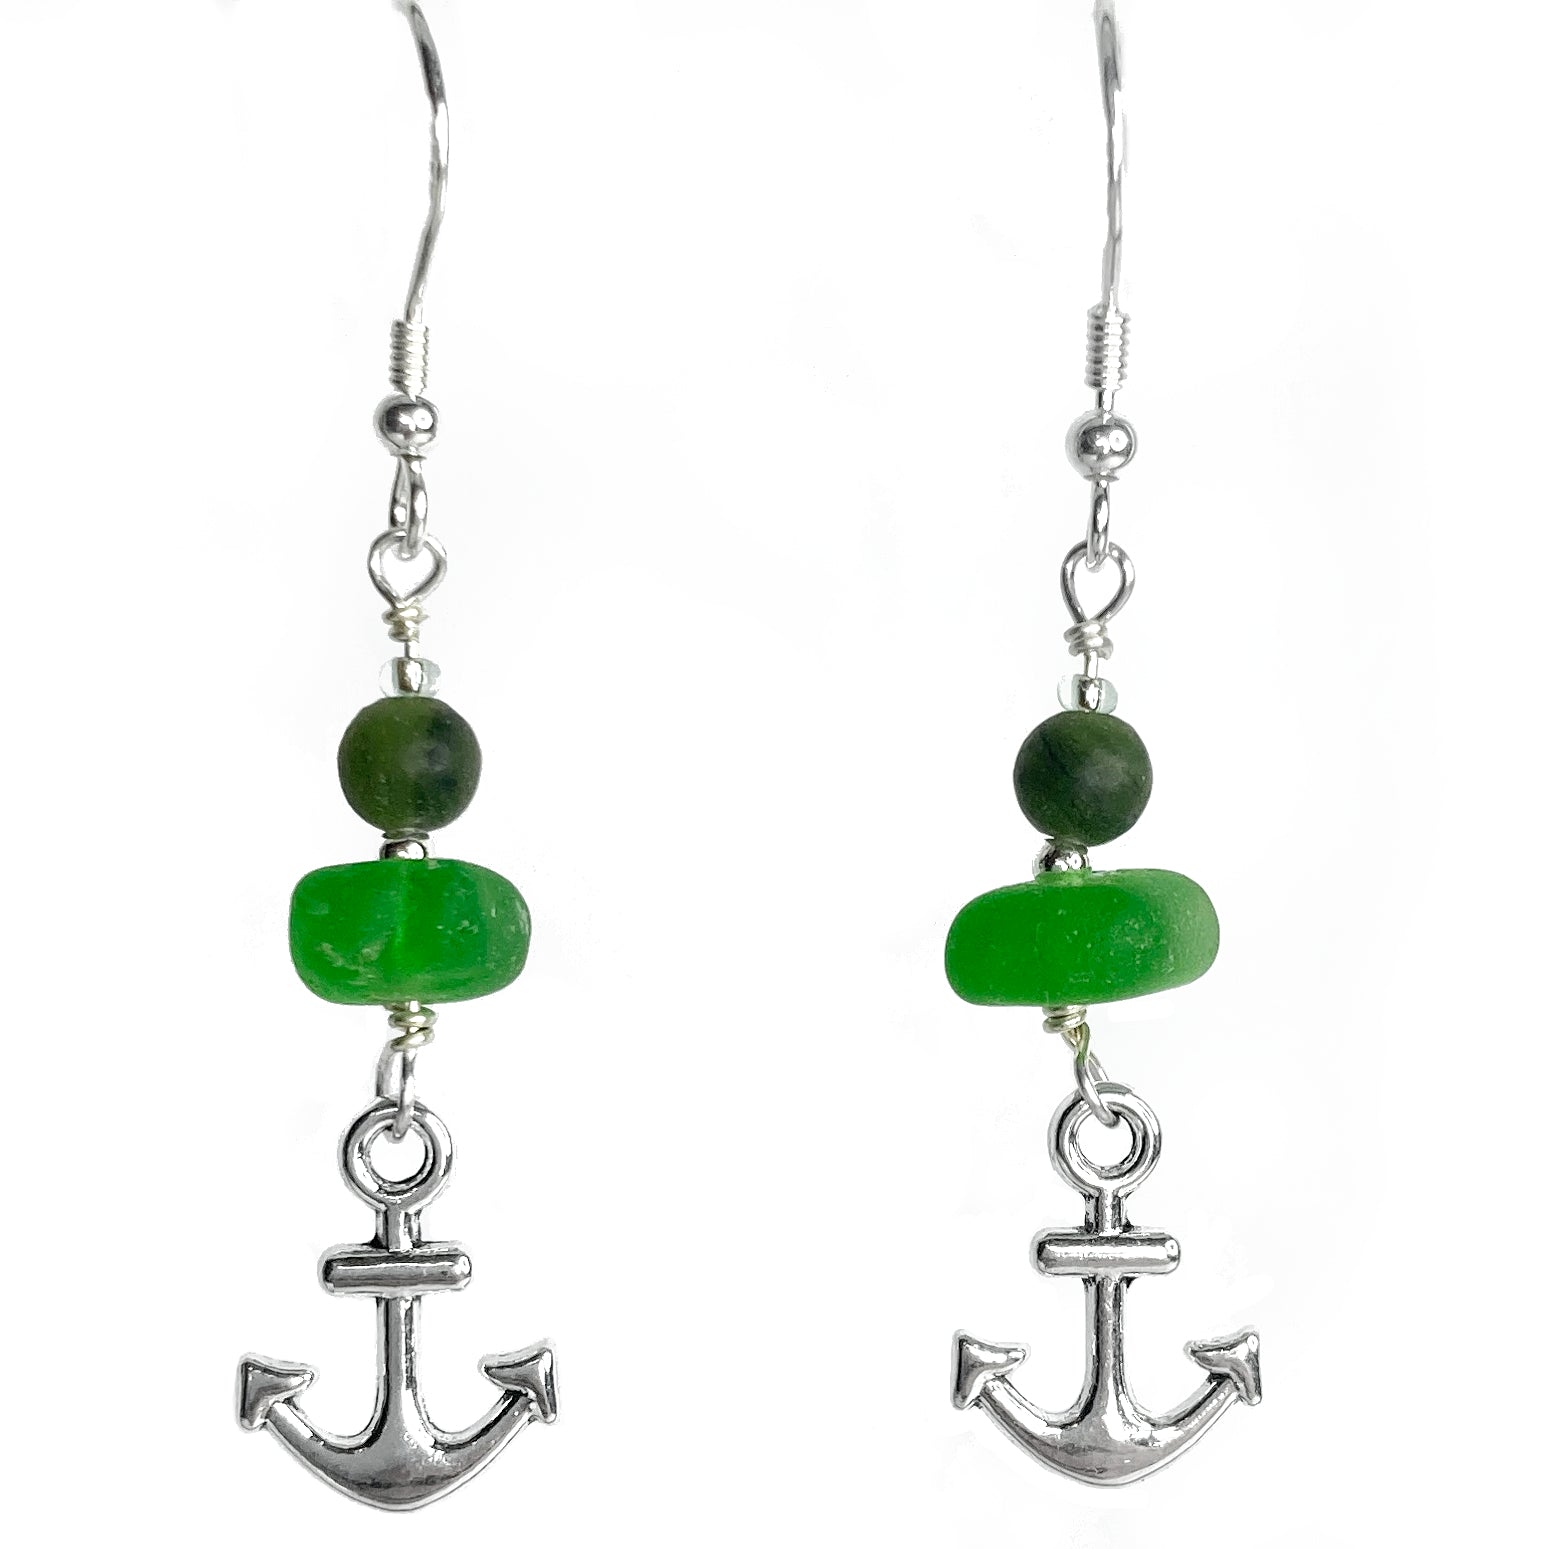 Anchor Earrings - Green Sea Glass & Silver Jewellery with Jade Crystal Beads - East Neuk Beach Crafts